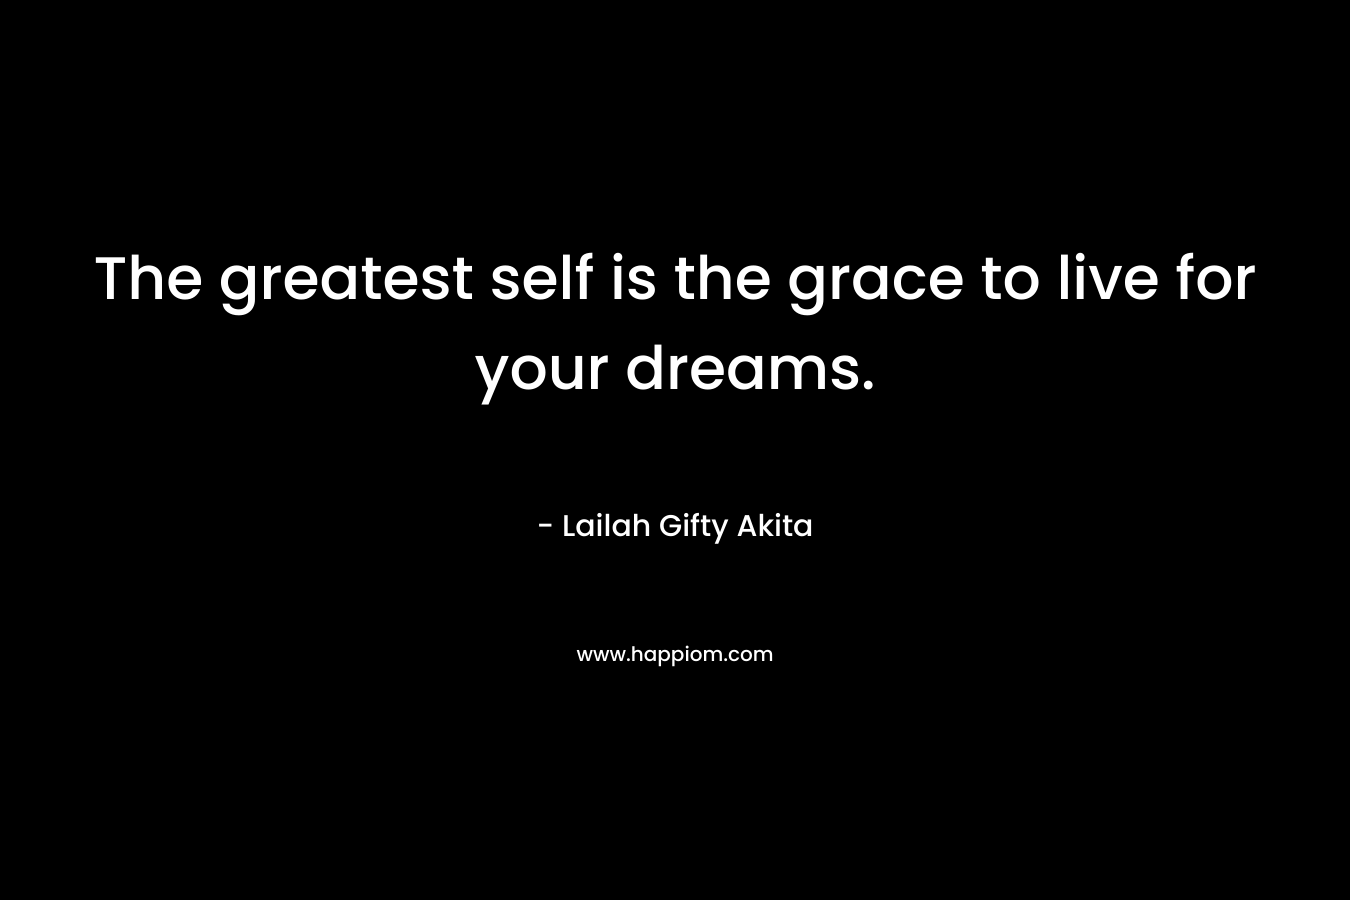 The greatest self is the grace to live for your dreams.